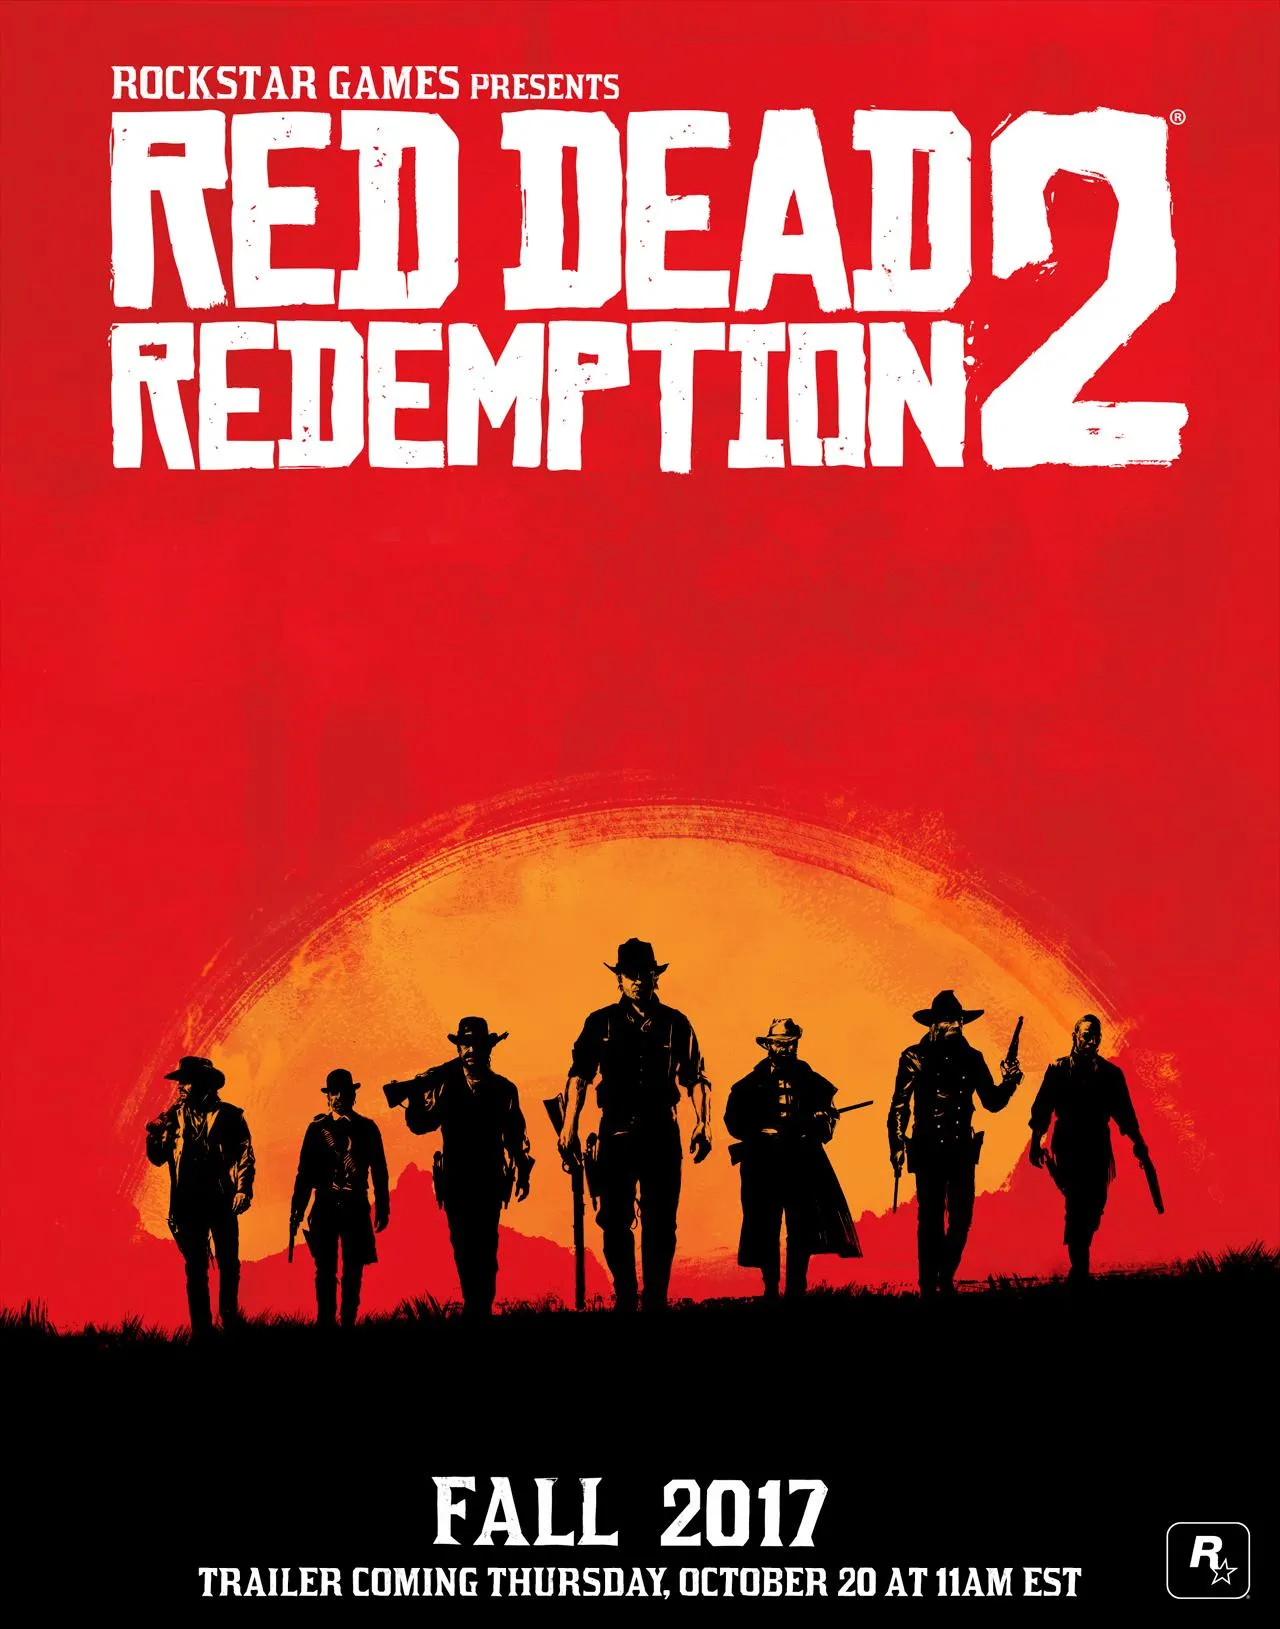 Red Dead Redemption 2 Announced - First Trailer Coming on October 20